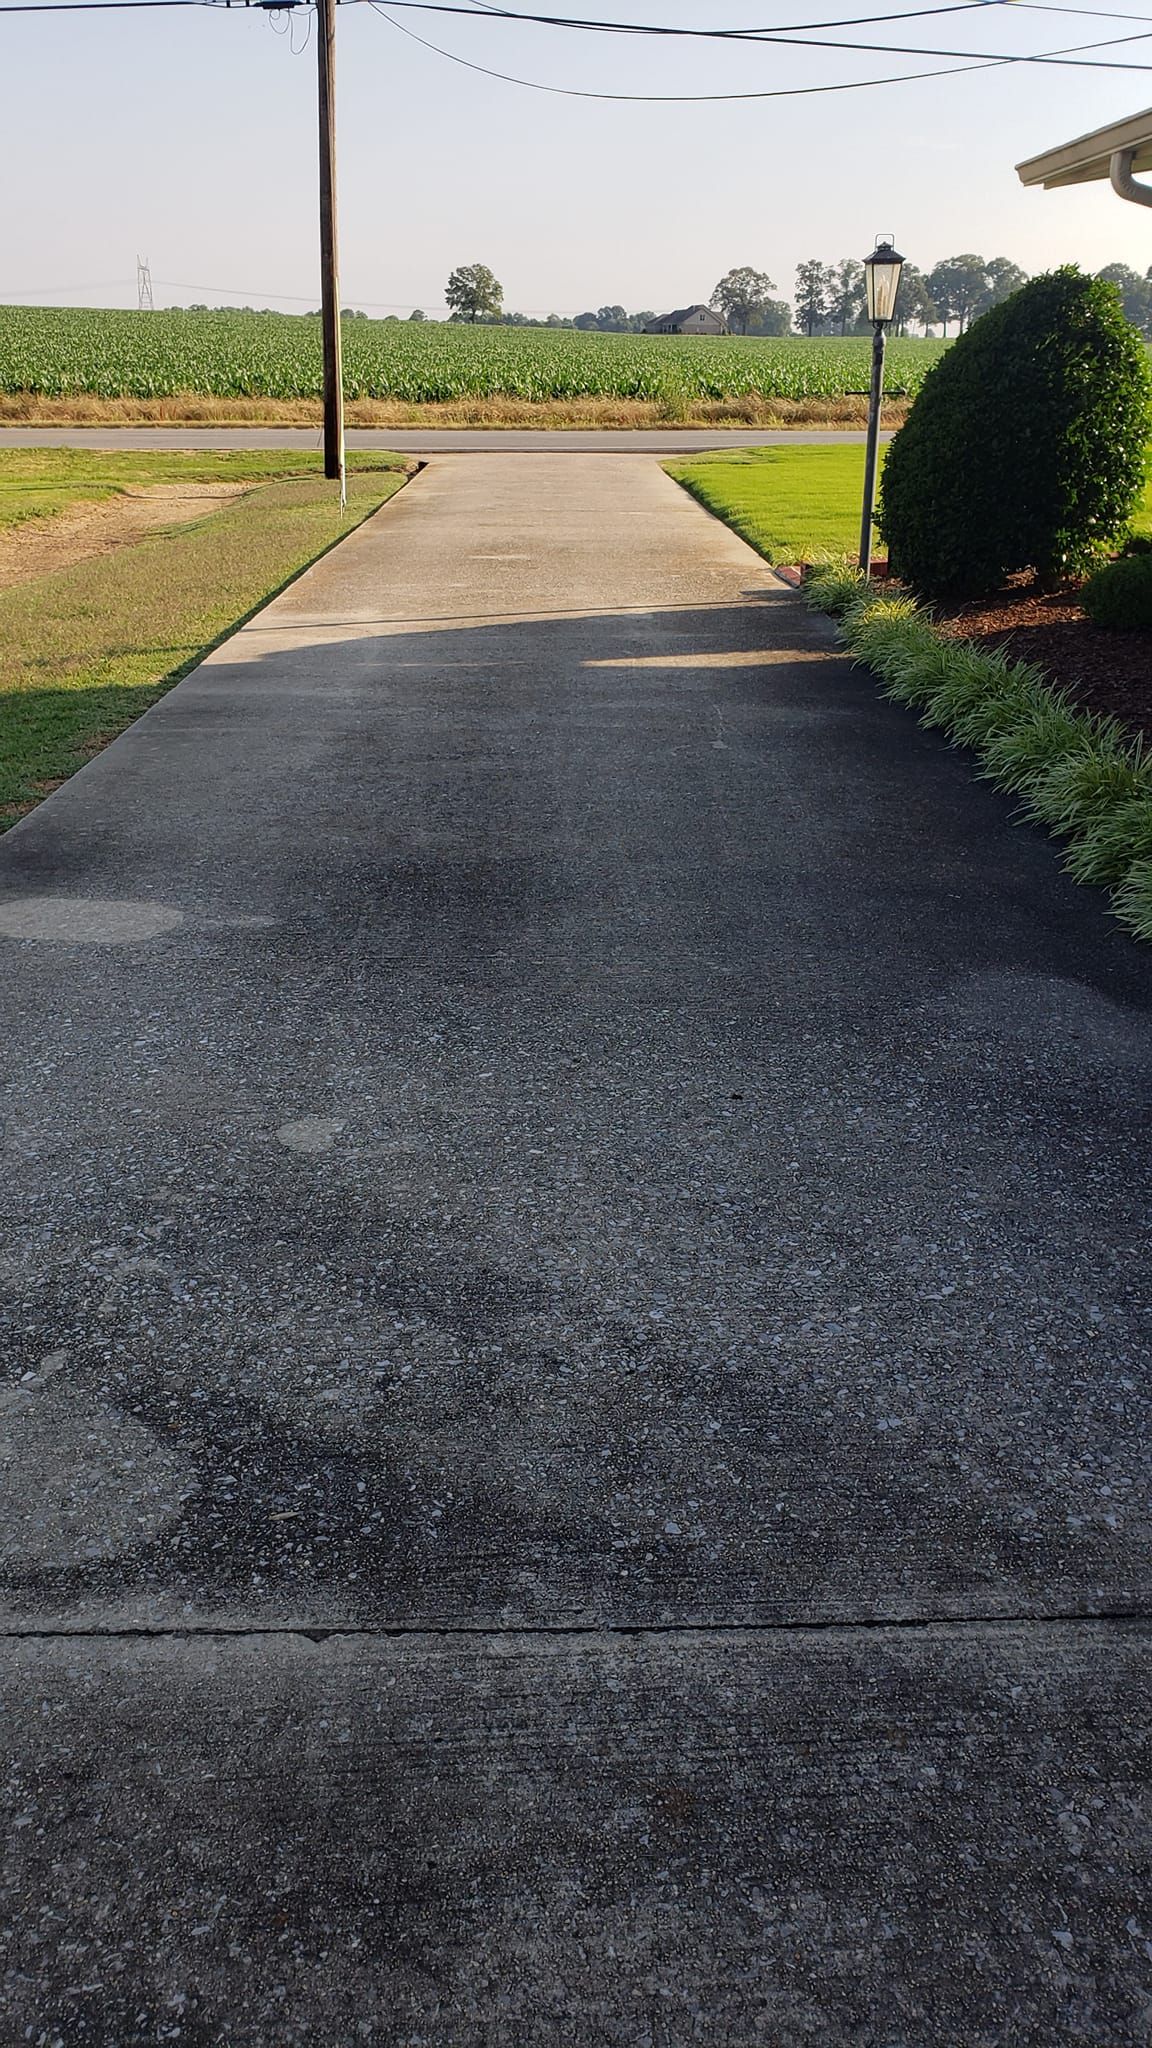 Before Power Washing Driveway In Front of Field and Utility Pole | Harvest, AL | Radiant Exterior Cleaning